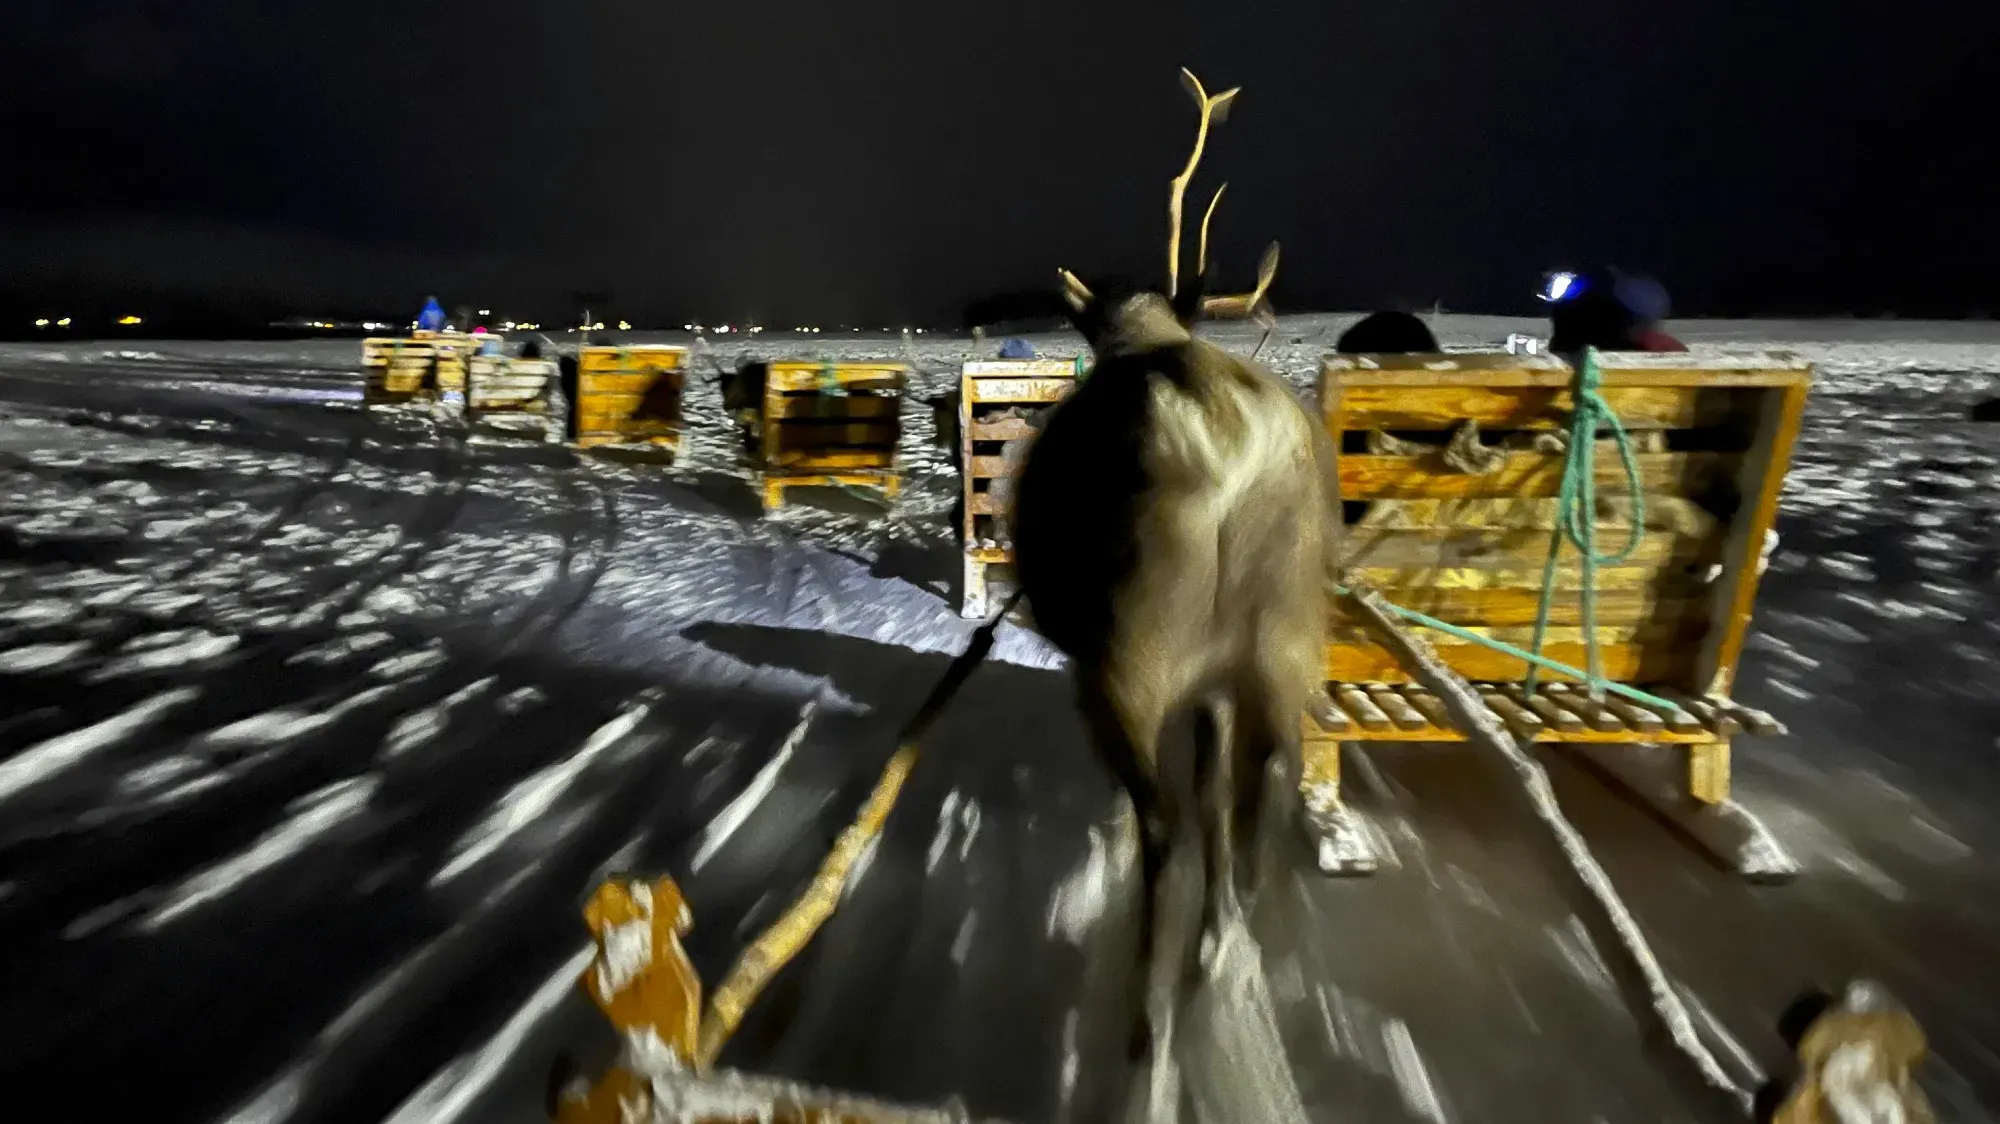 Sequence of wooden sleds pulled at night by reindeer